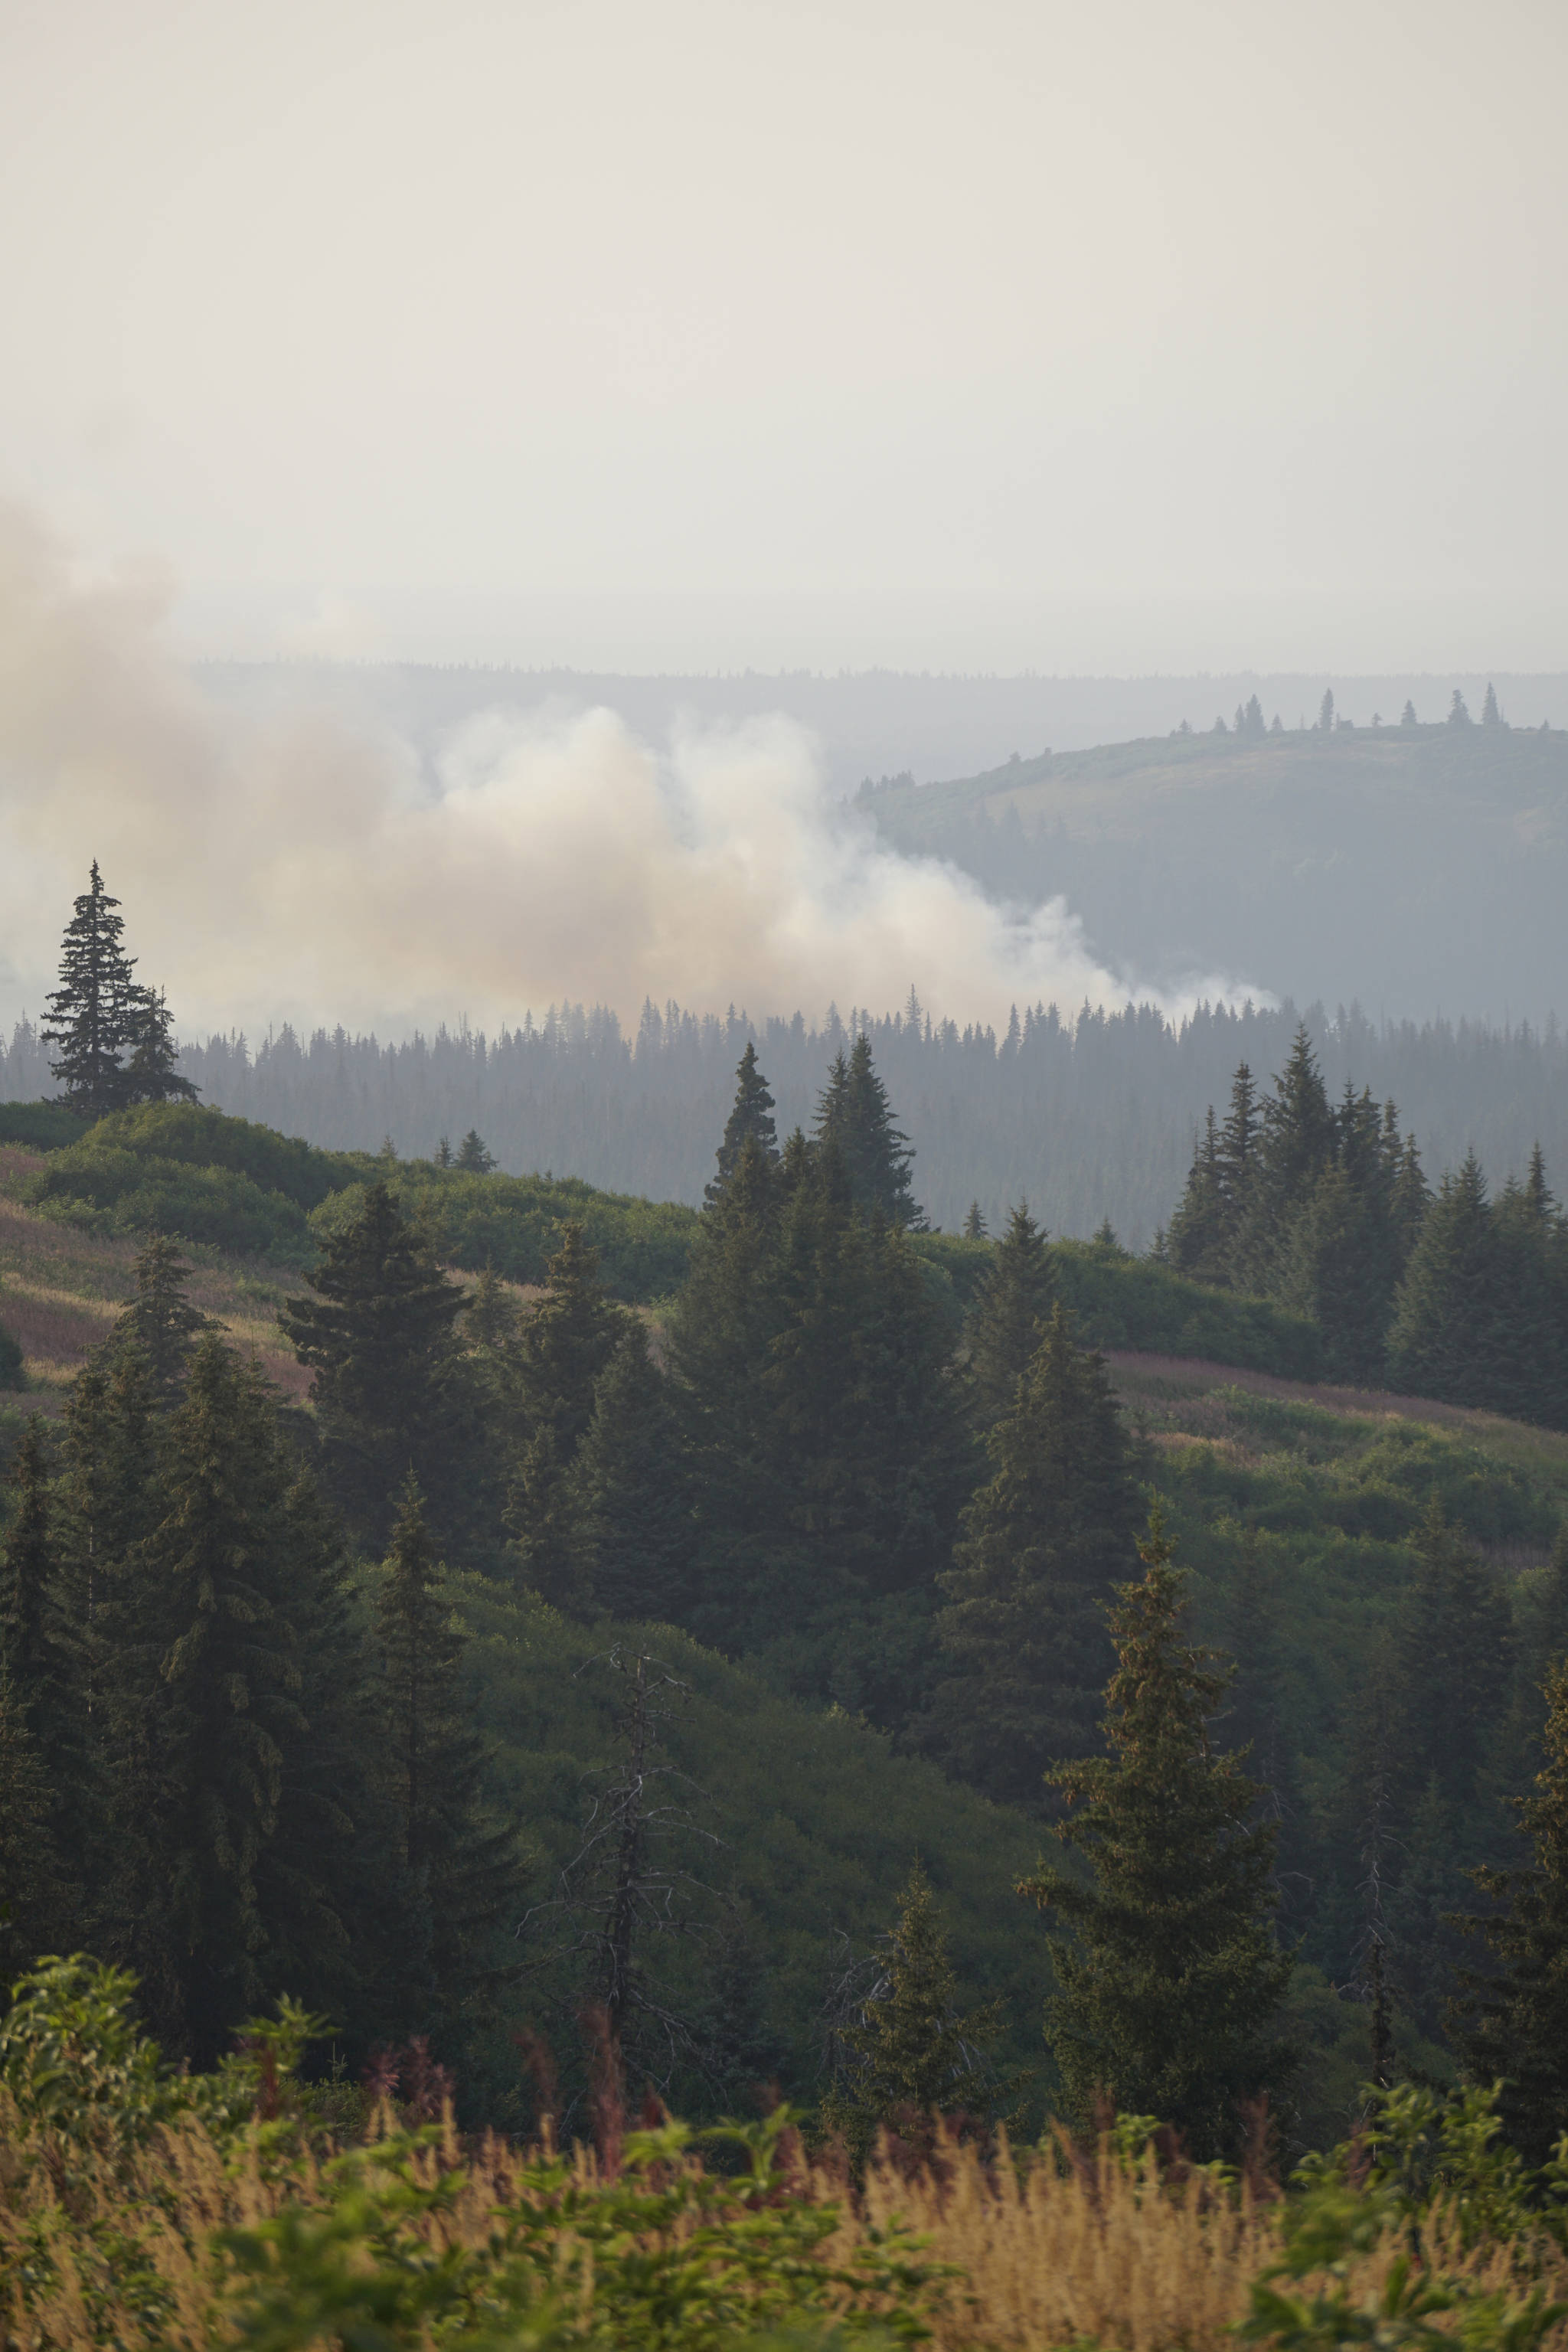 The North Fork fire burns near the south end of the North Fork Road on Sunday evening, Aug. 18, 2019, near Homer, Alaska, as seen from Diamond Ridge Road. (Photo by Michael Armstrong/Homer News)